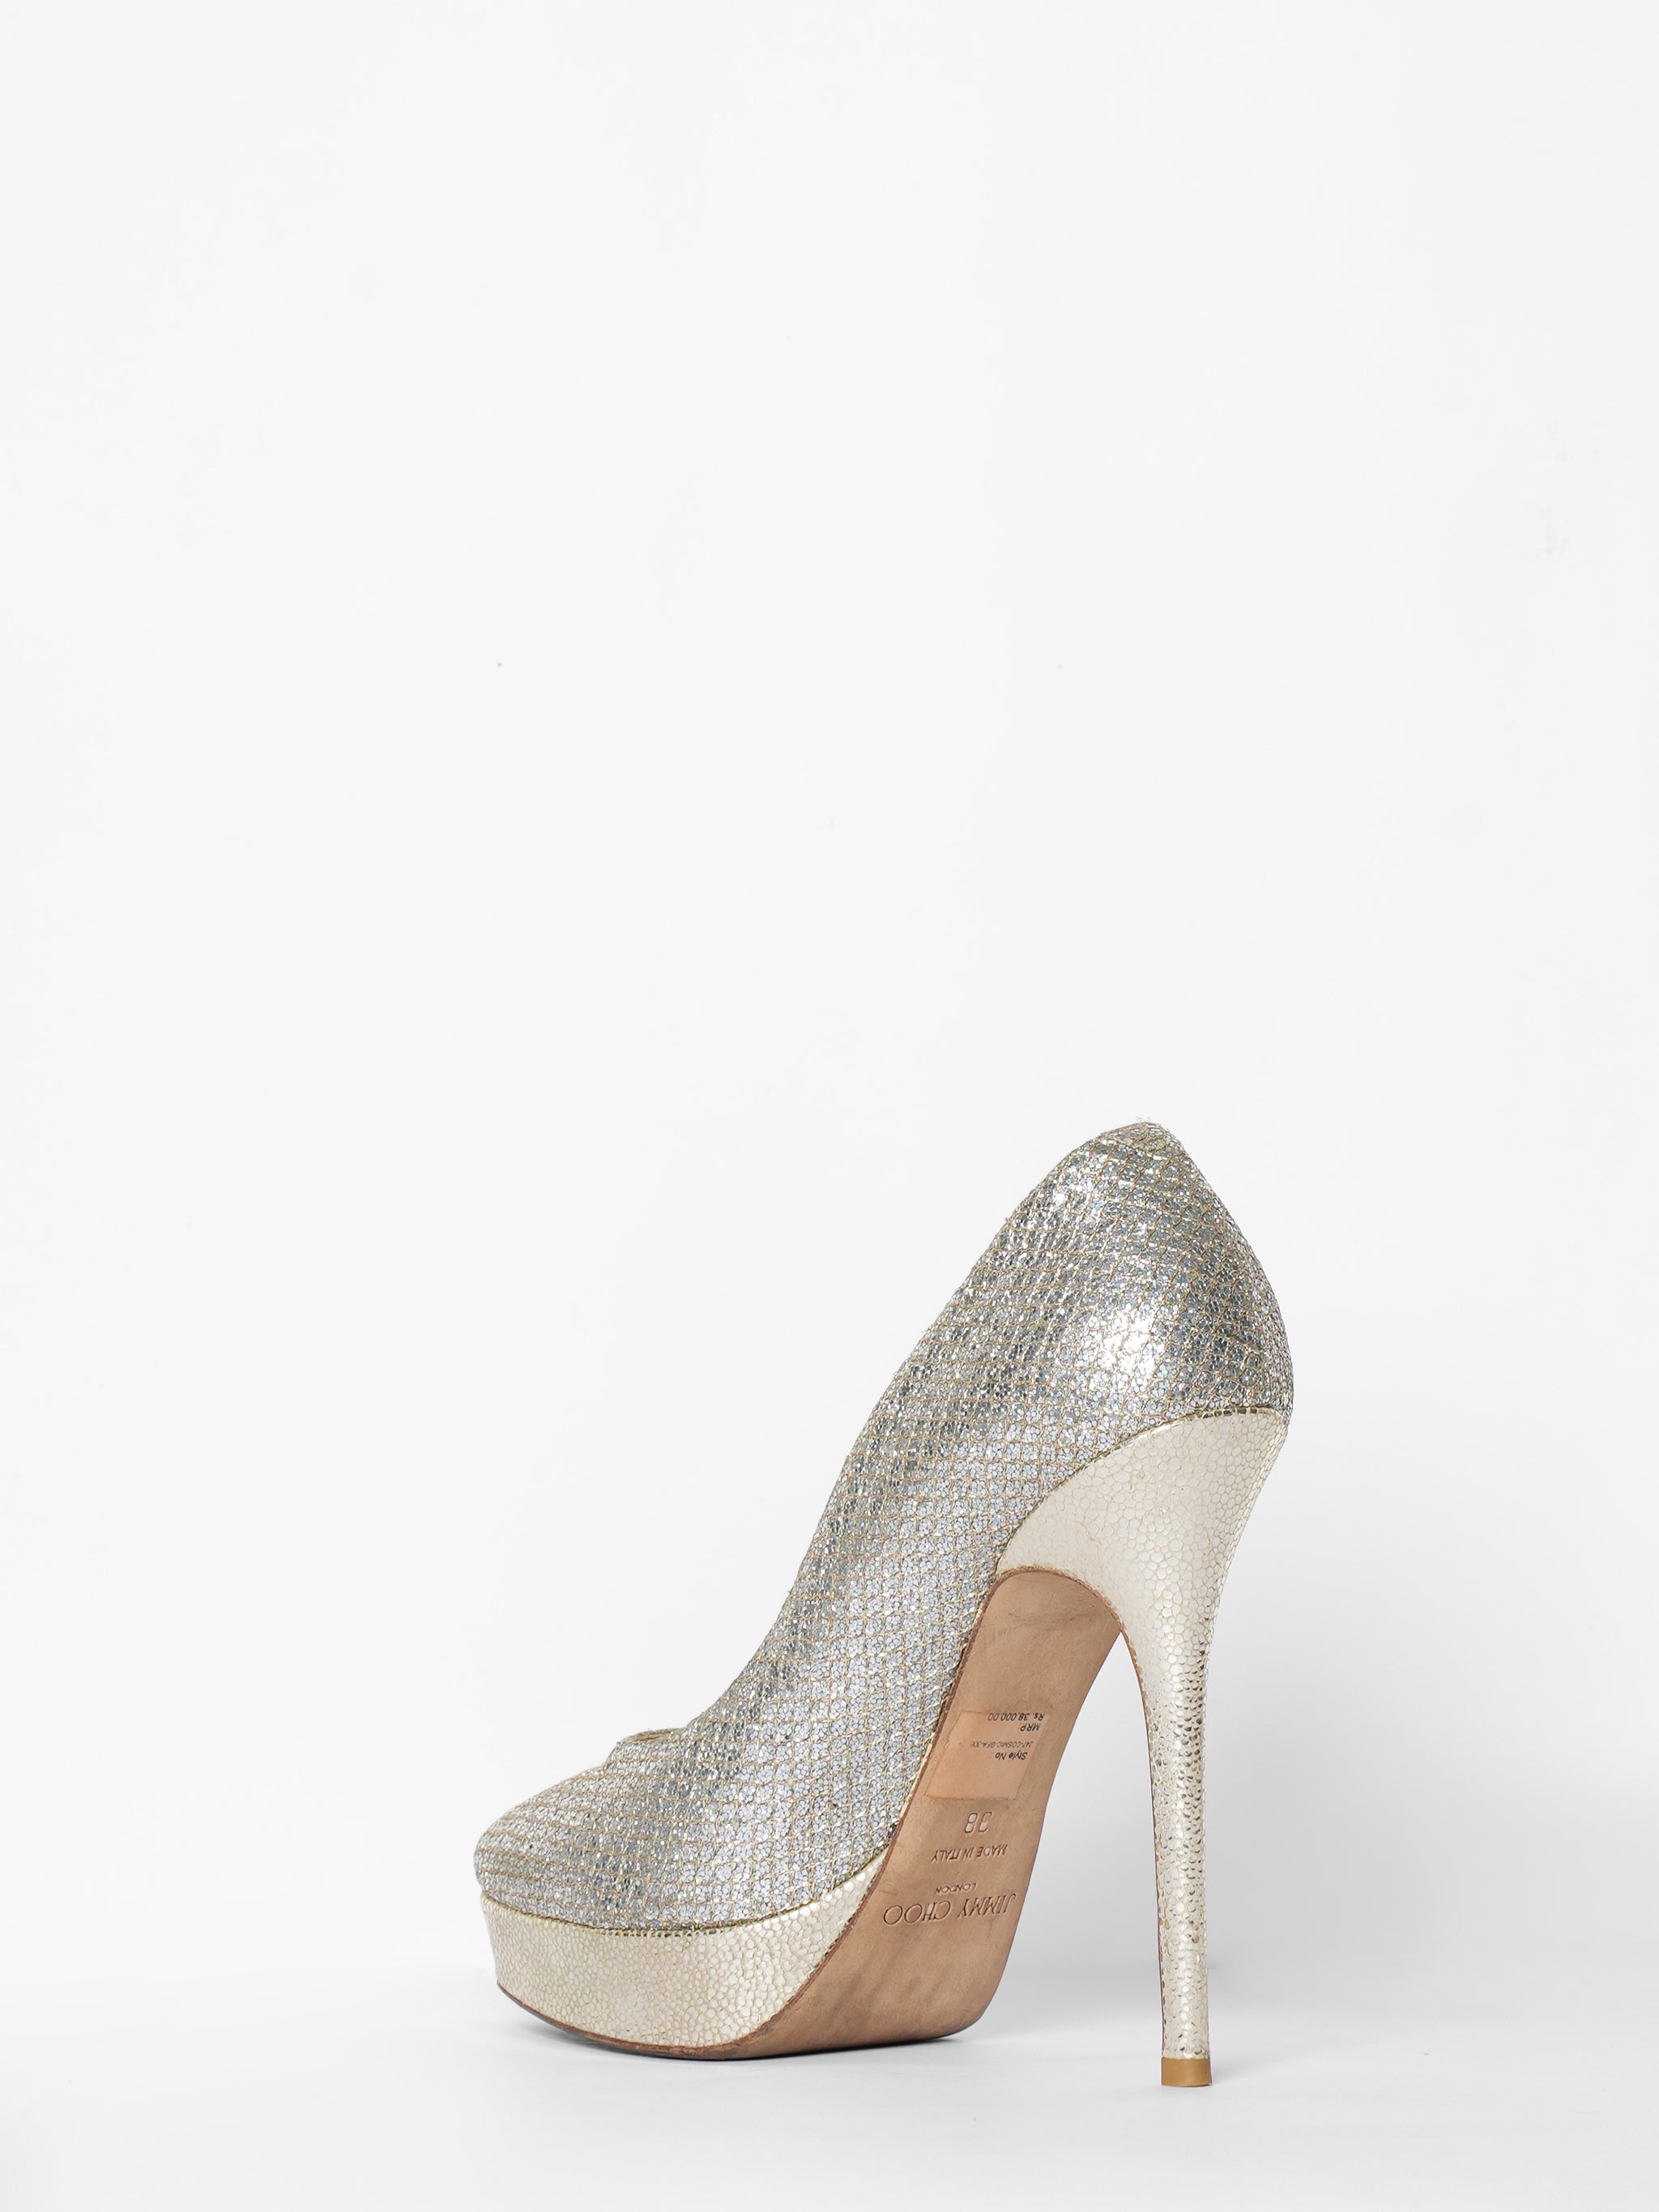 JIMMY CHOO: Romy pumps in glittery fabric - Silver | Jimmy Choo pumps  ROMY85DGZ online at GIGLIO.COM